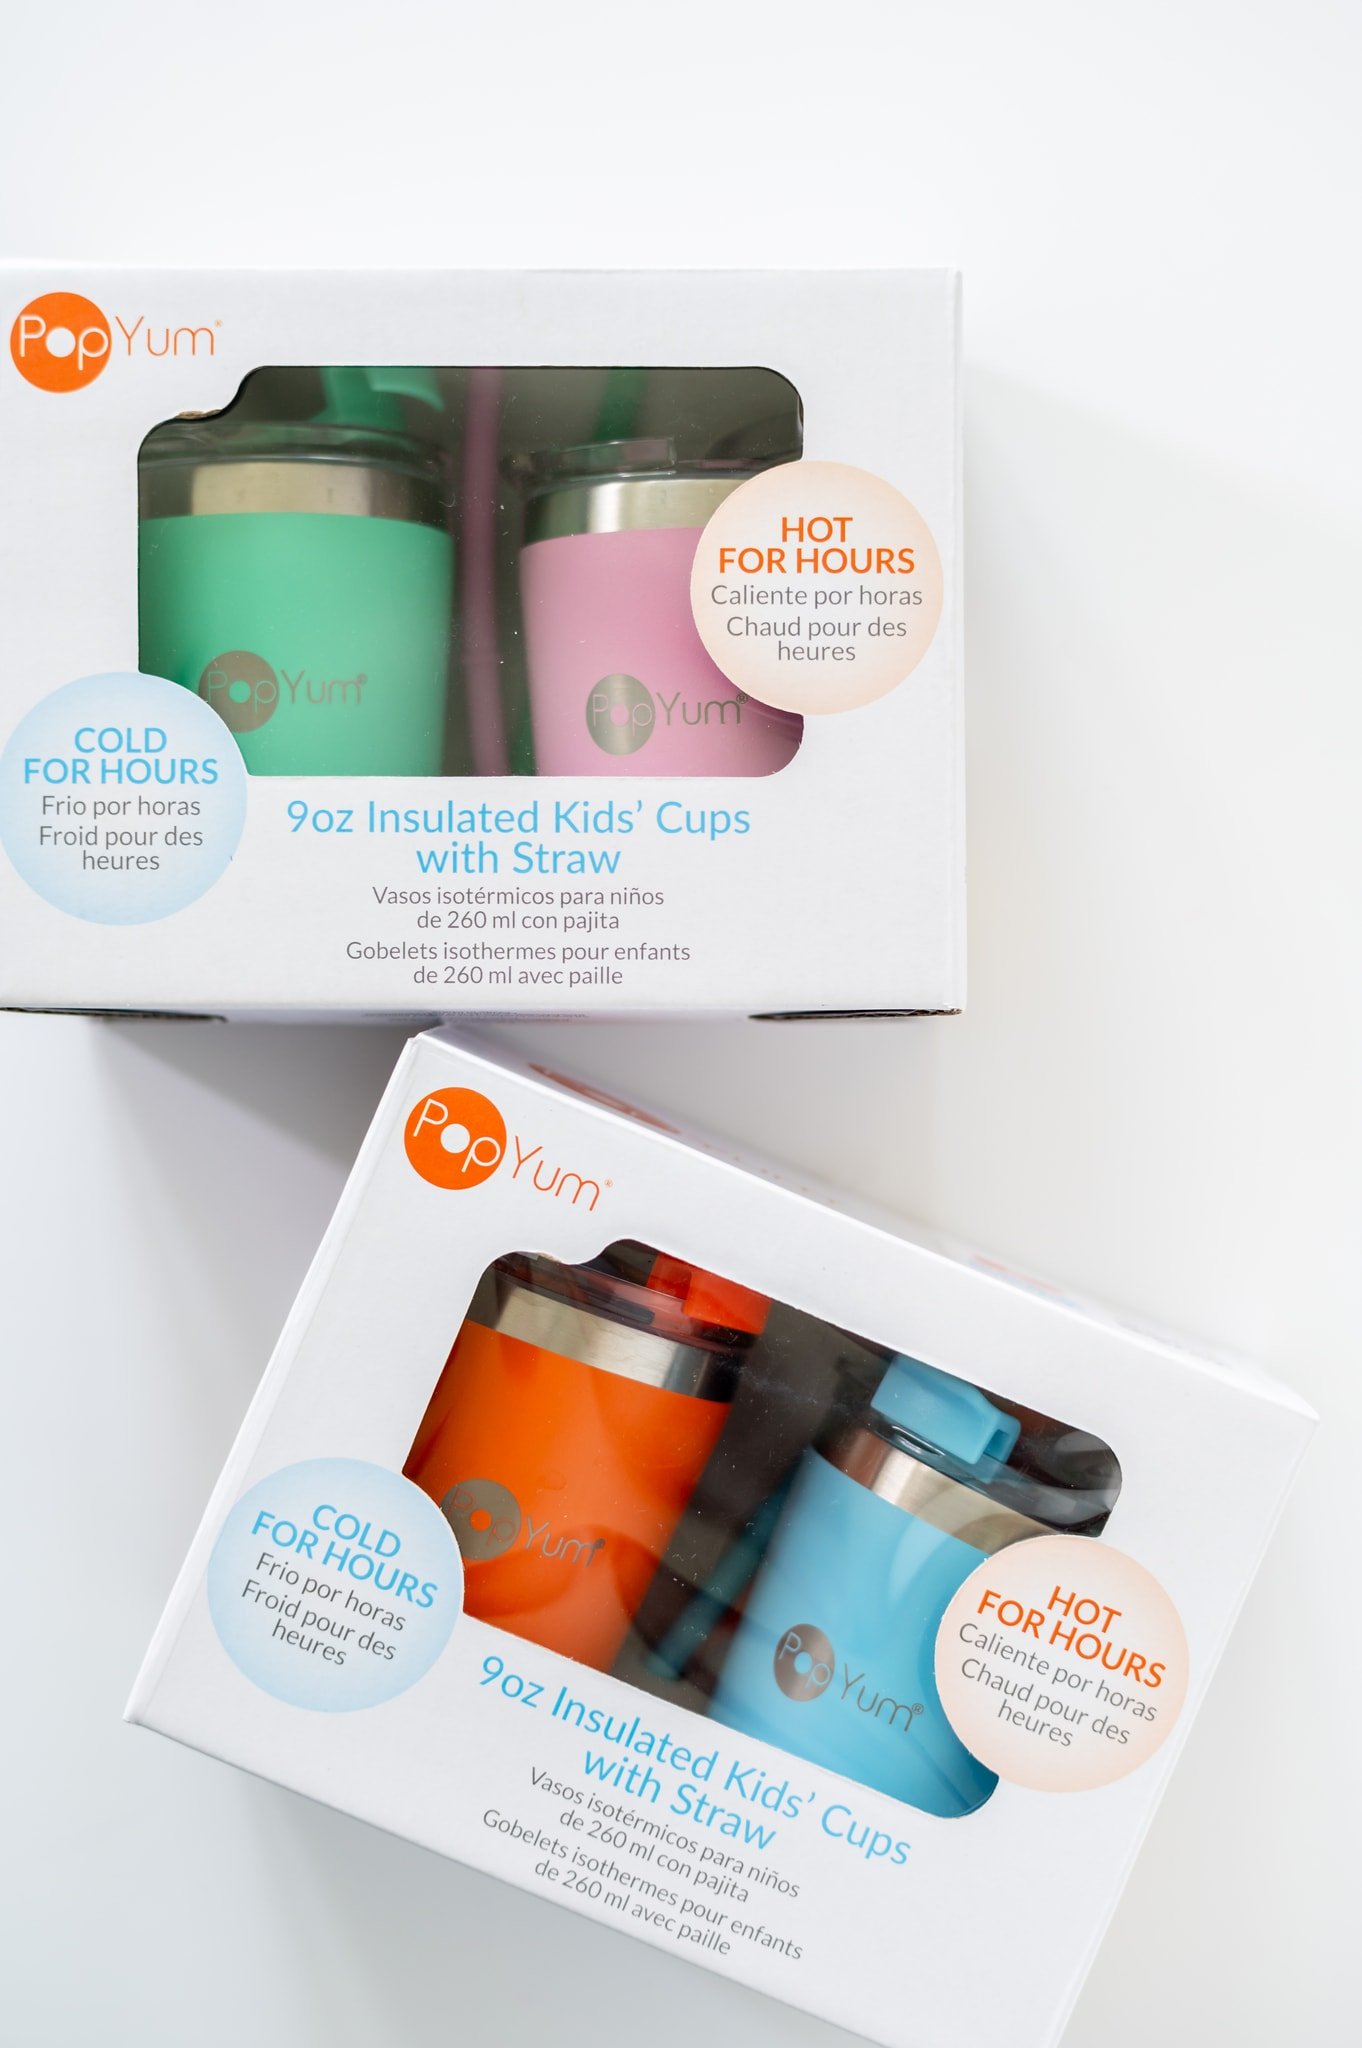 Two packs of the insulated PopYum Kids Cups